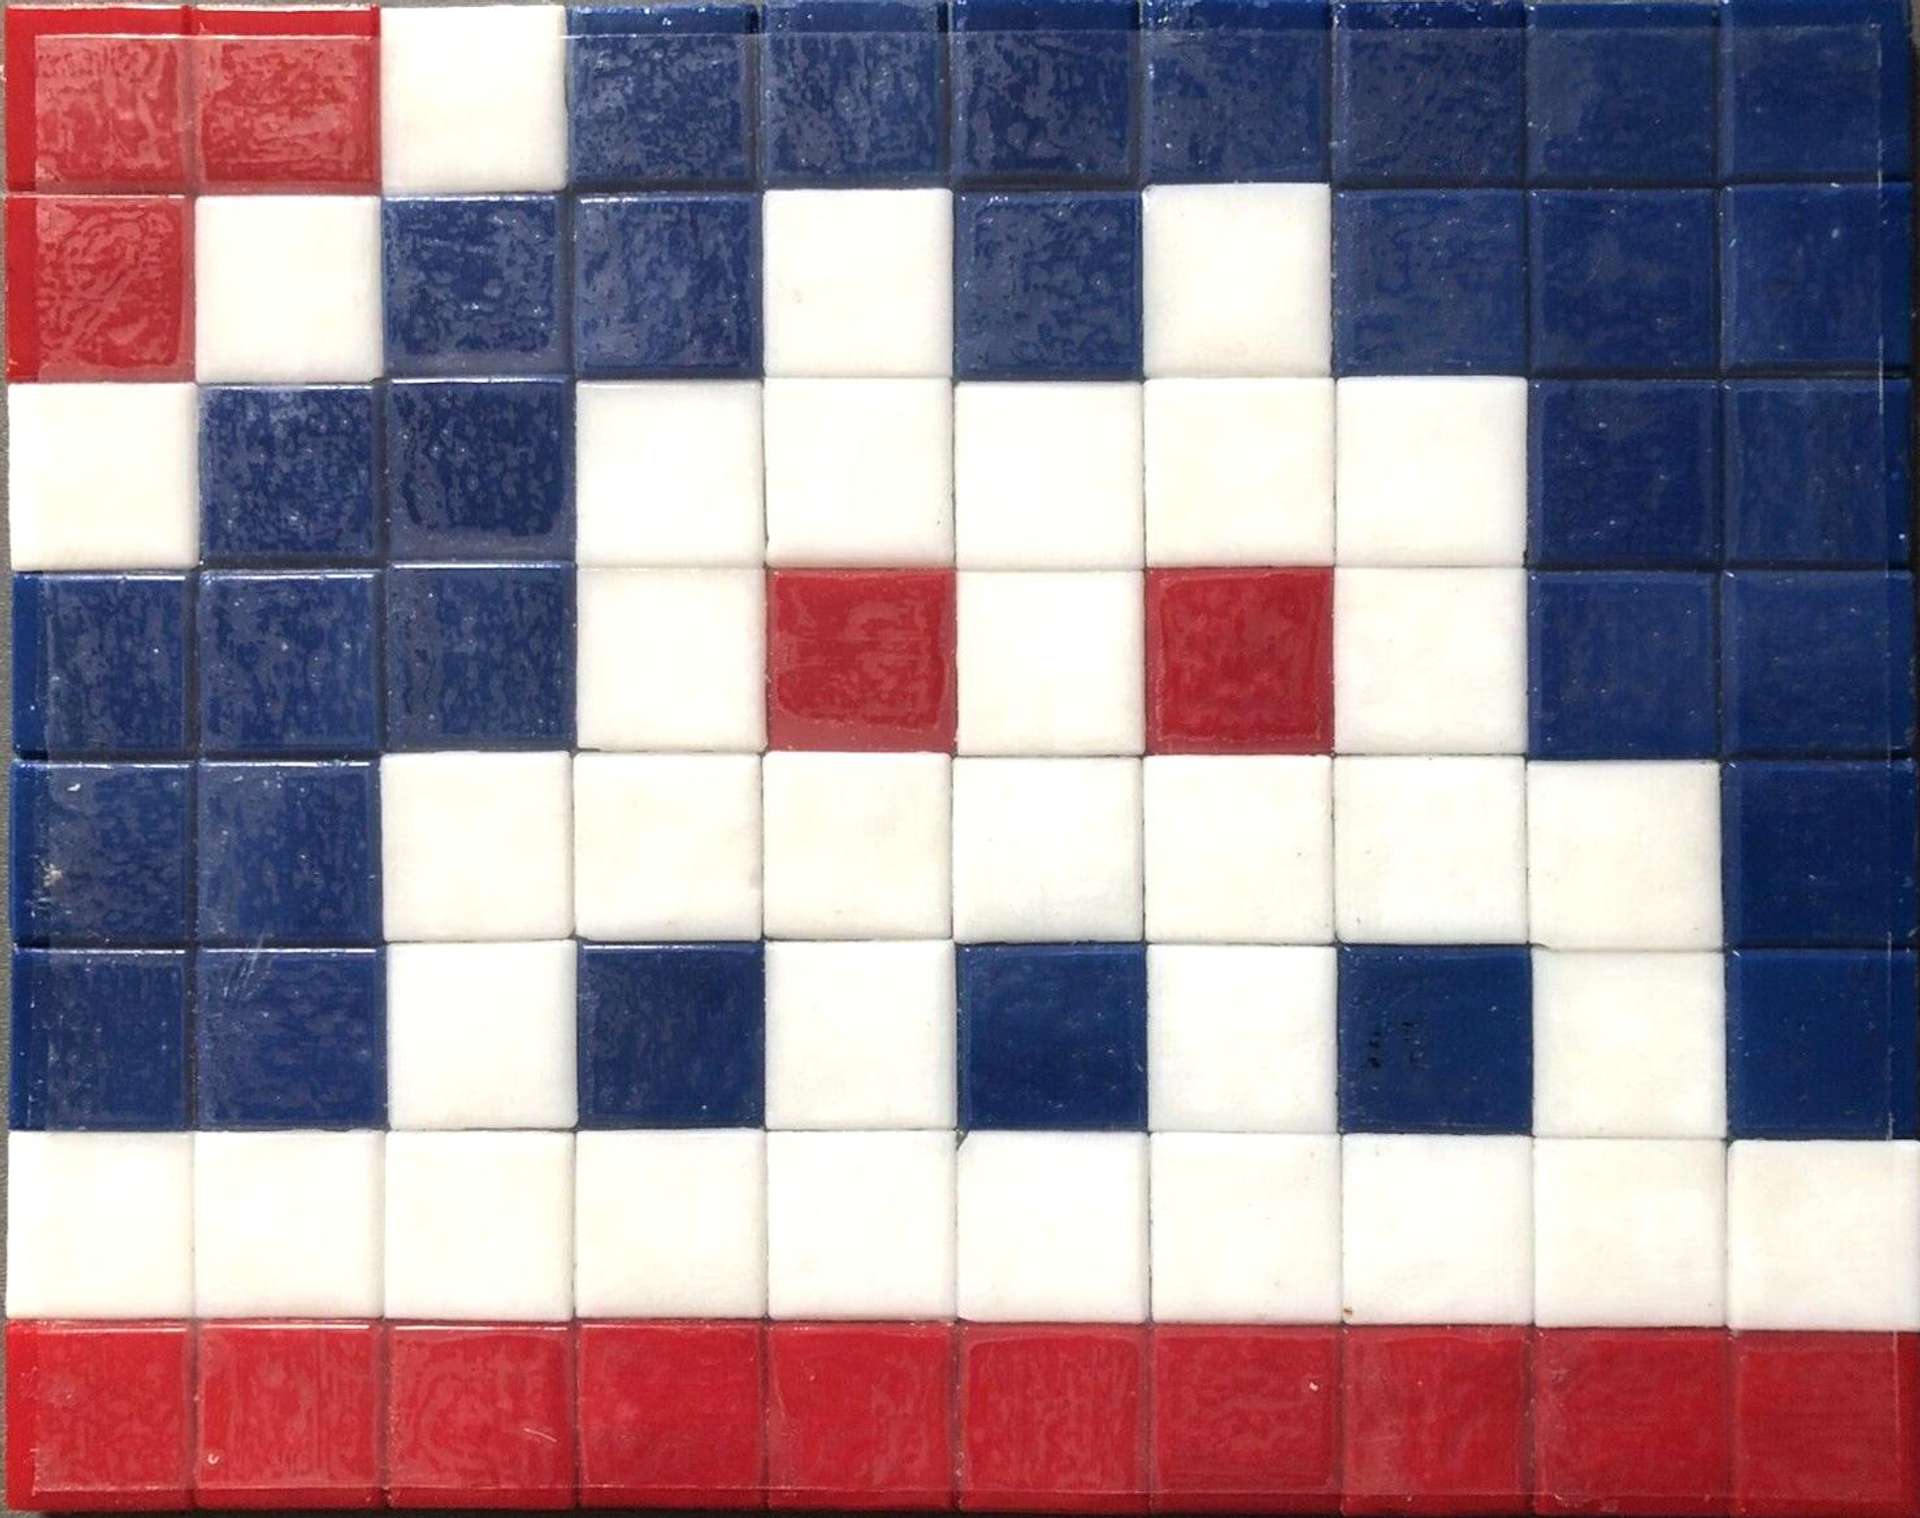 The artwork consists of a set of square, ceramic tiles, predominantly blue which take on the appearance of an alien from the popular arcade game Space Invaders. 